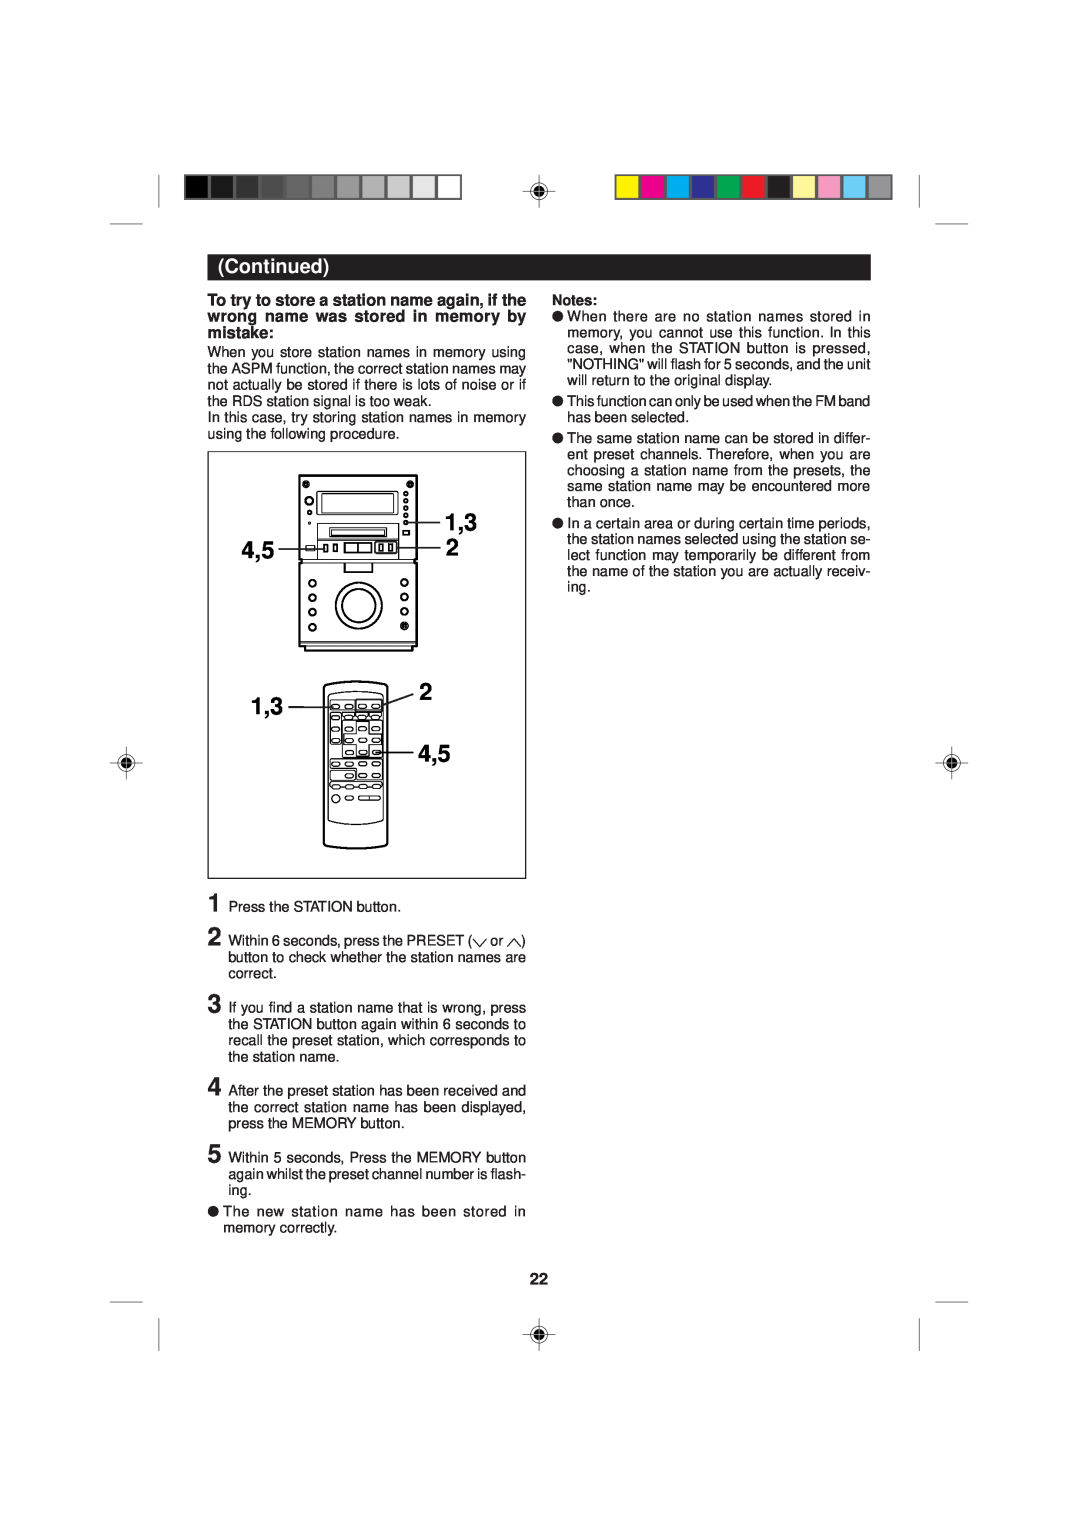 Sharp MD-M1H operation manual 1,3 4,5 2 4,5, Continued 